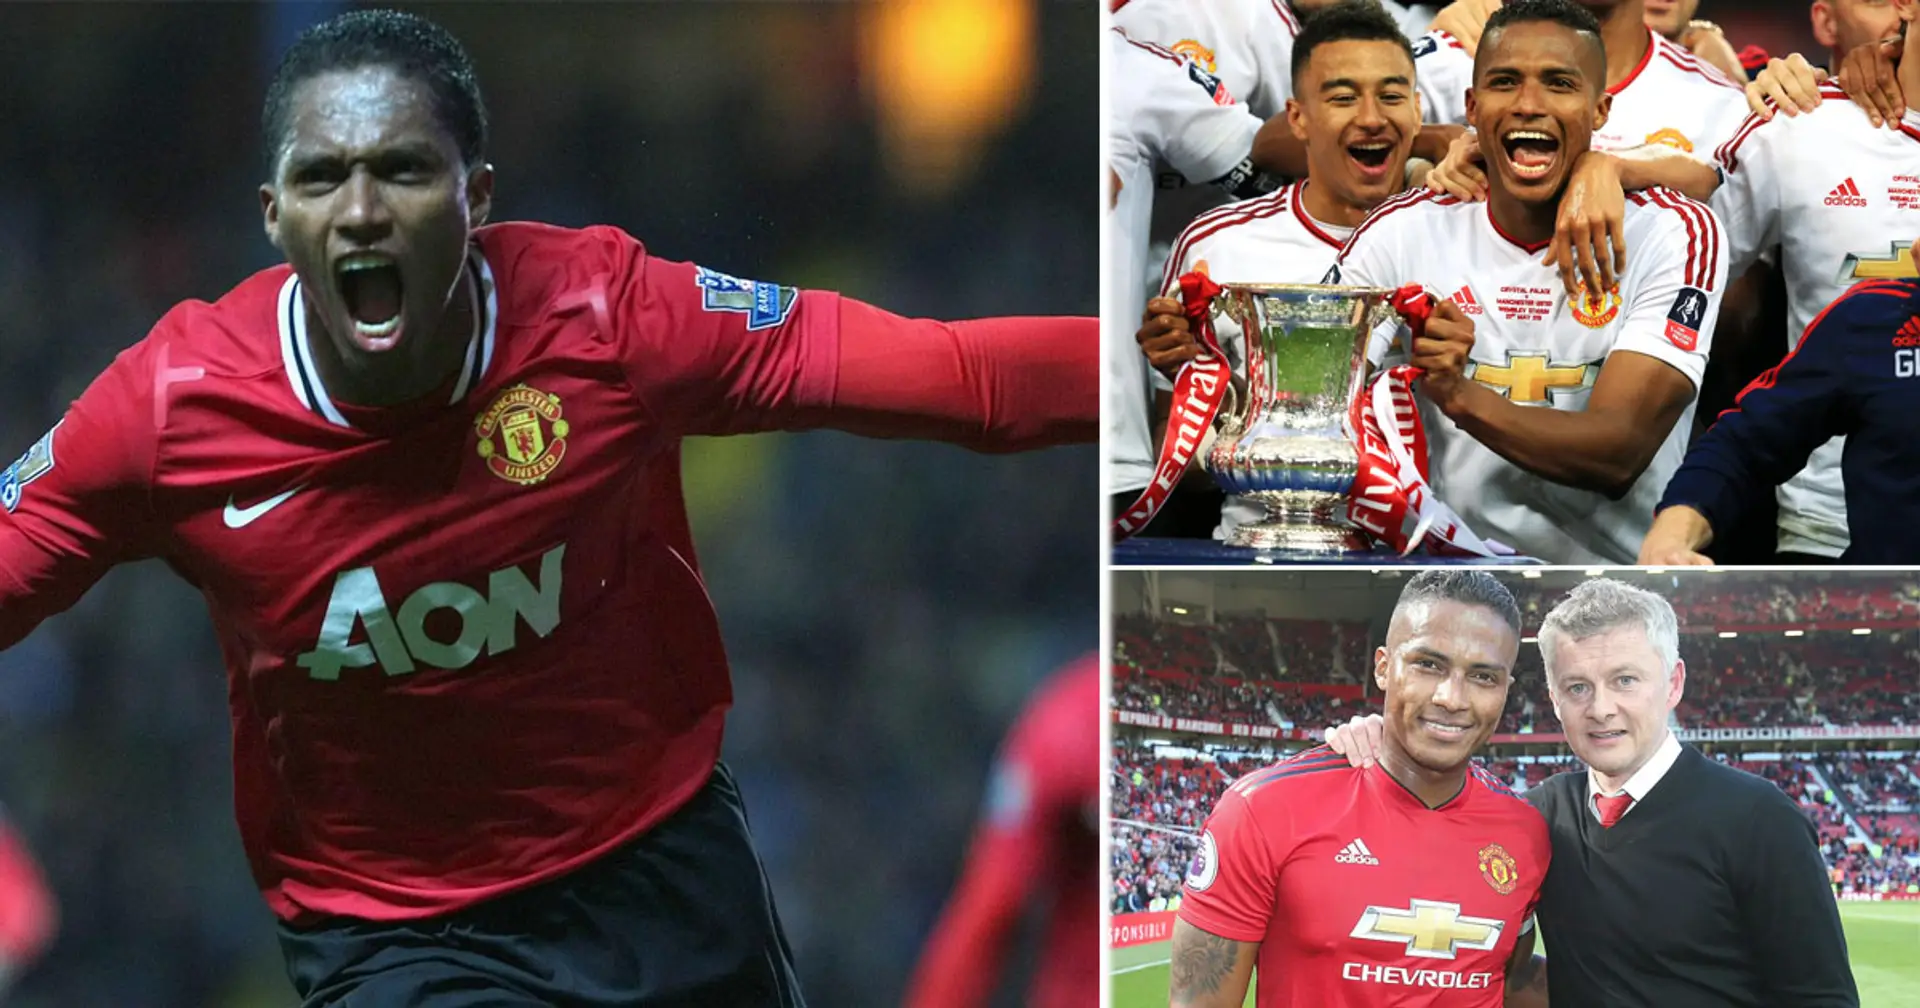 Antonio Valencia announces retirement from football - and United fans make sure to pay their respects